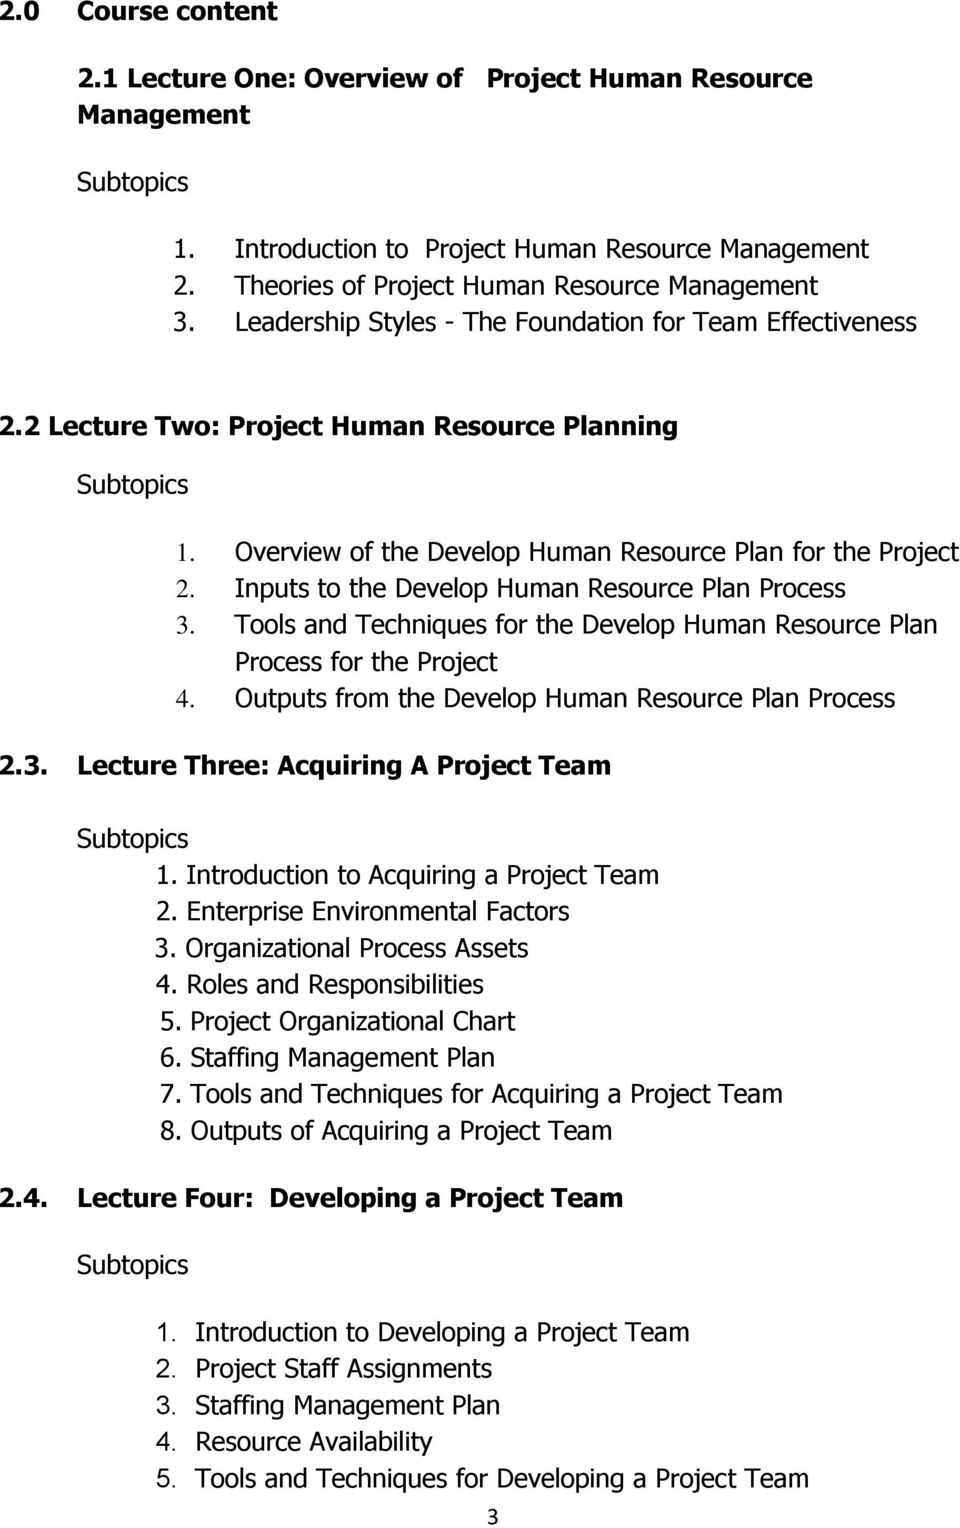 Inputs to the Develop Human Resource Plan Process 3. Tools and Techniques for the Develop Human Resource Plan Process for the Project 4. Outputs from the Develop Human Resource Plan Process 2.3. Lecture Three: Acquiring A Project Team 1.